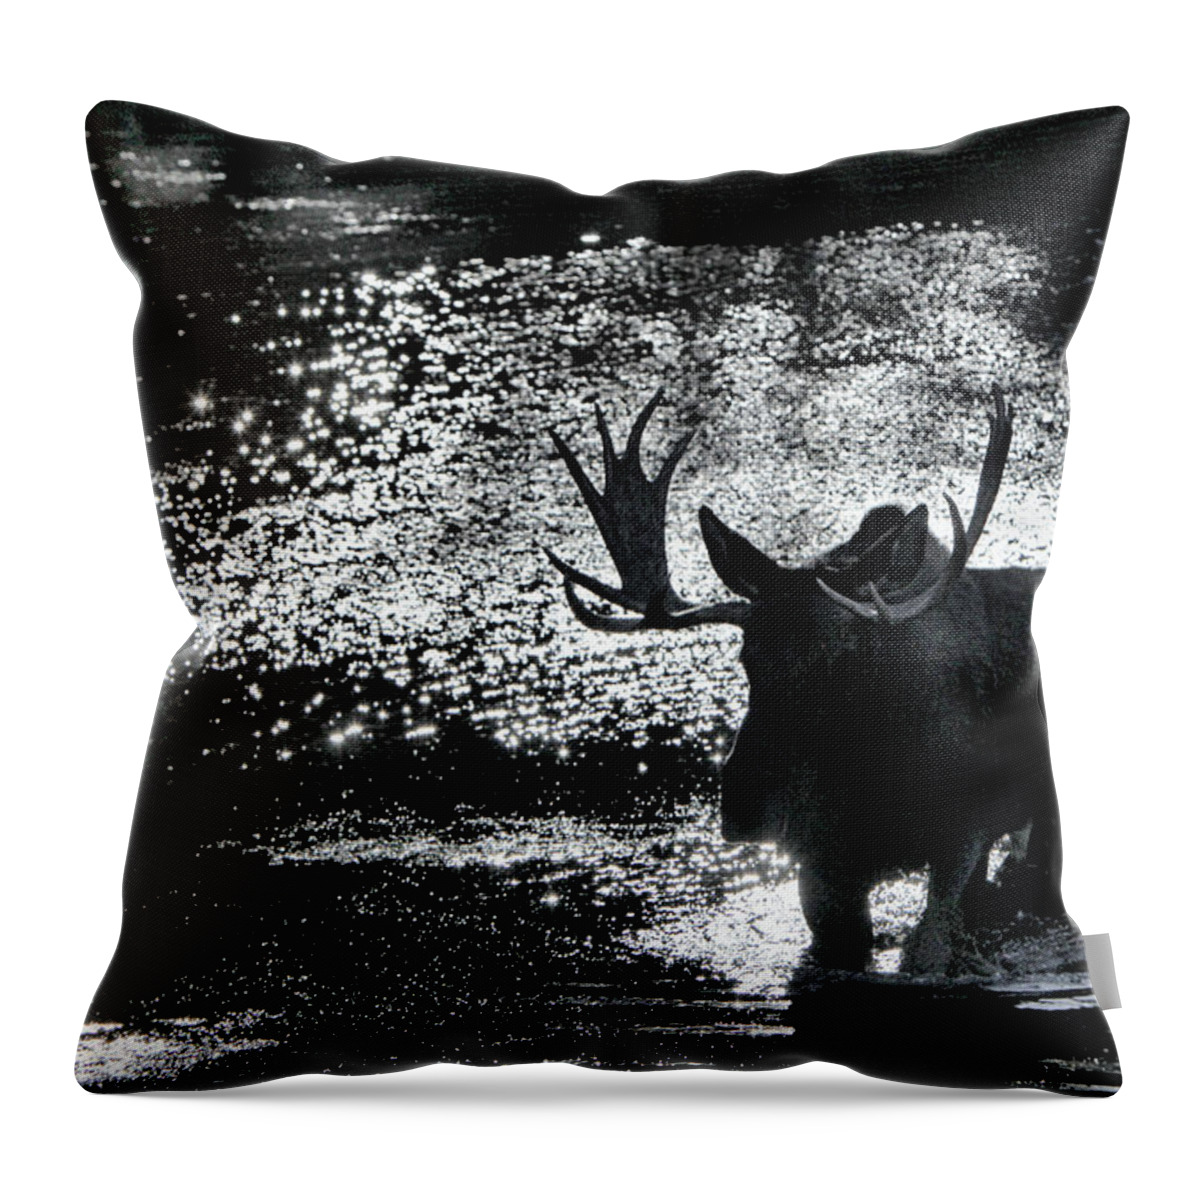 Cloud Cover Over Bull Moose Throw Pillow featuring the photograph Bull Moose Shadow by Marta Alfred